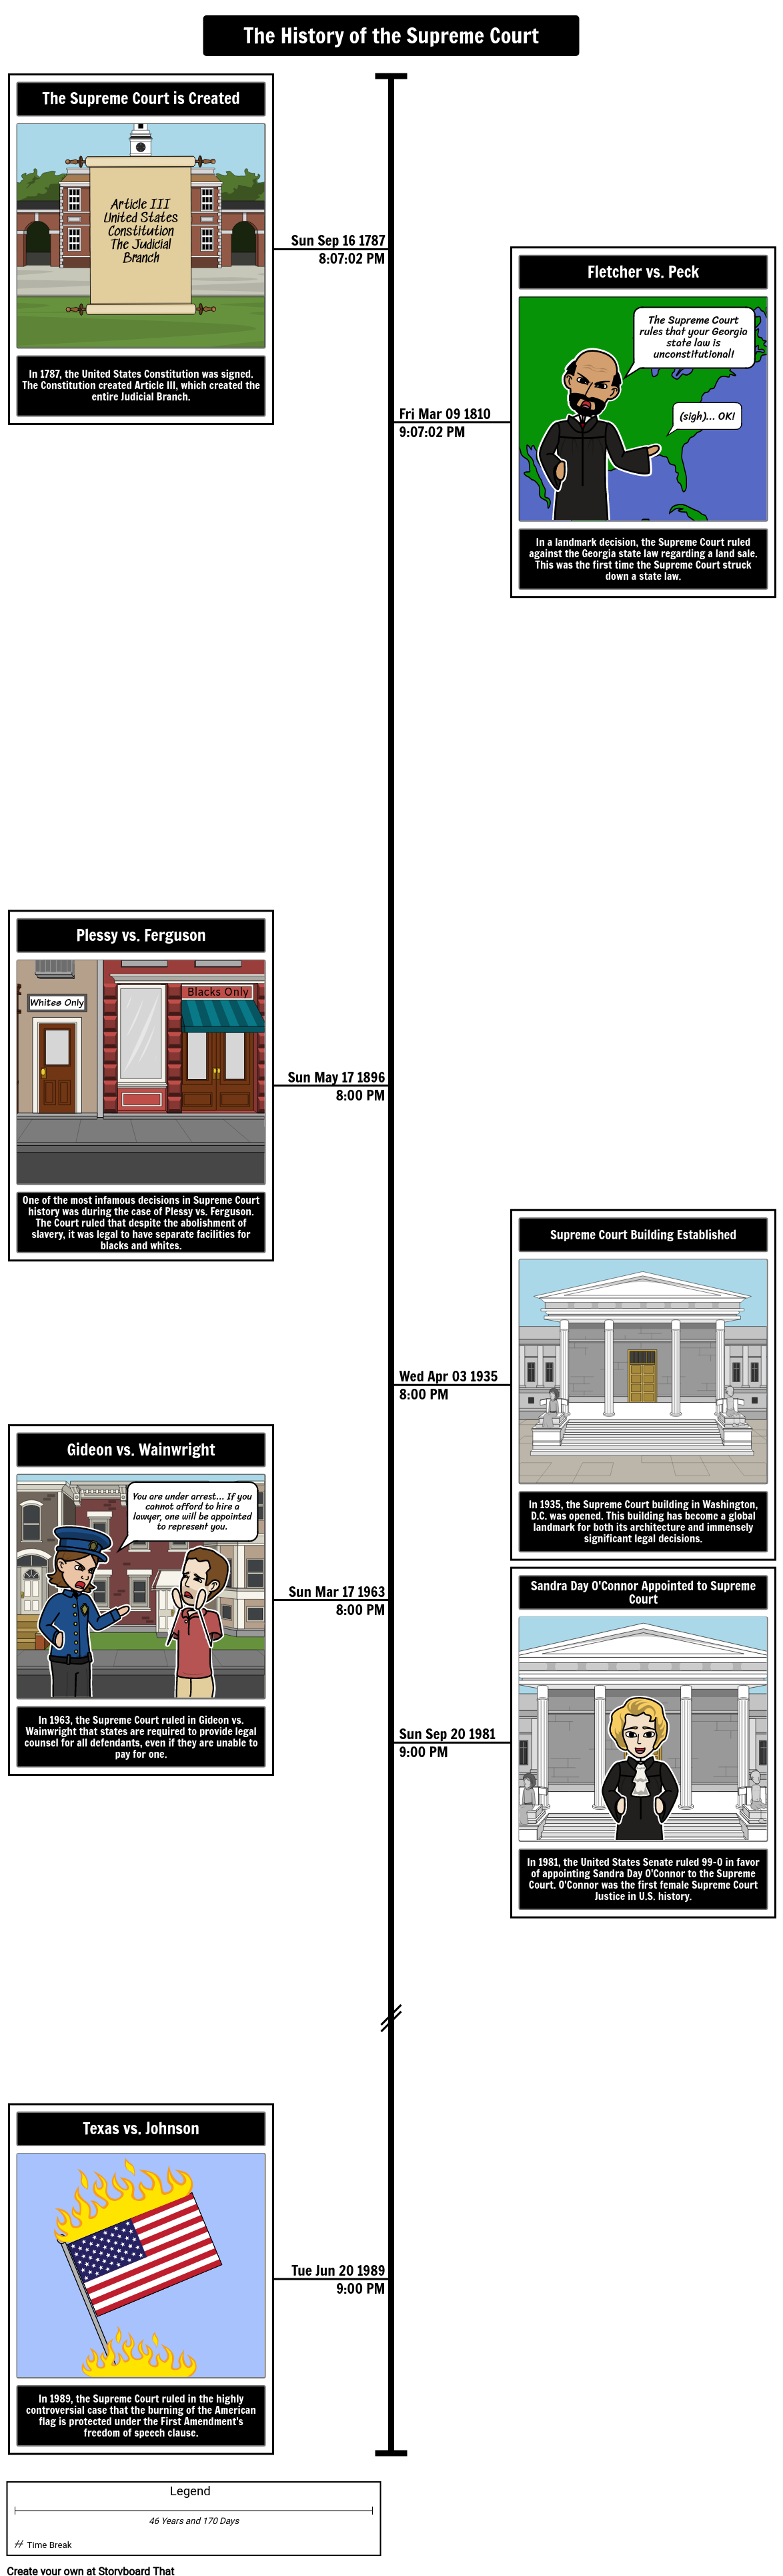 A History of the Supreme Court Timeline Storyboard